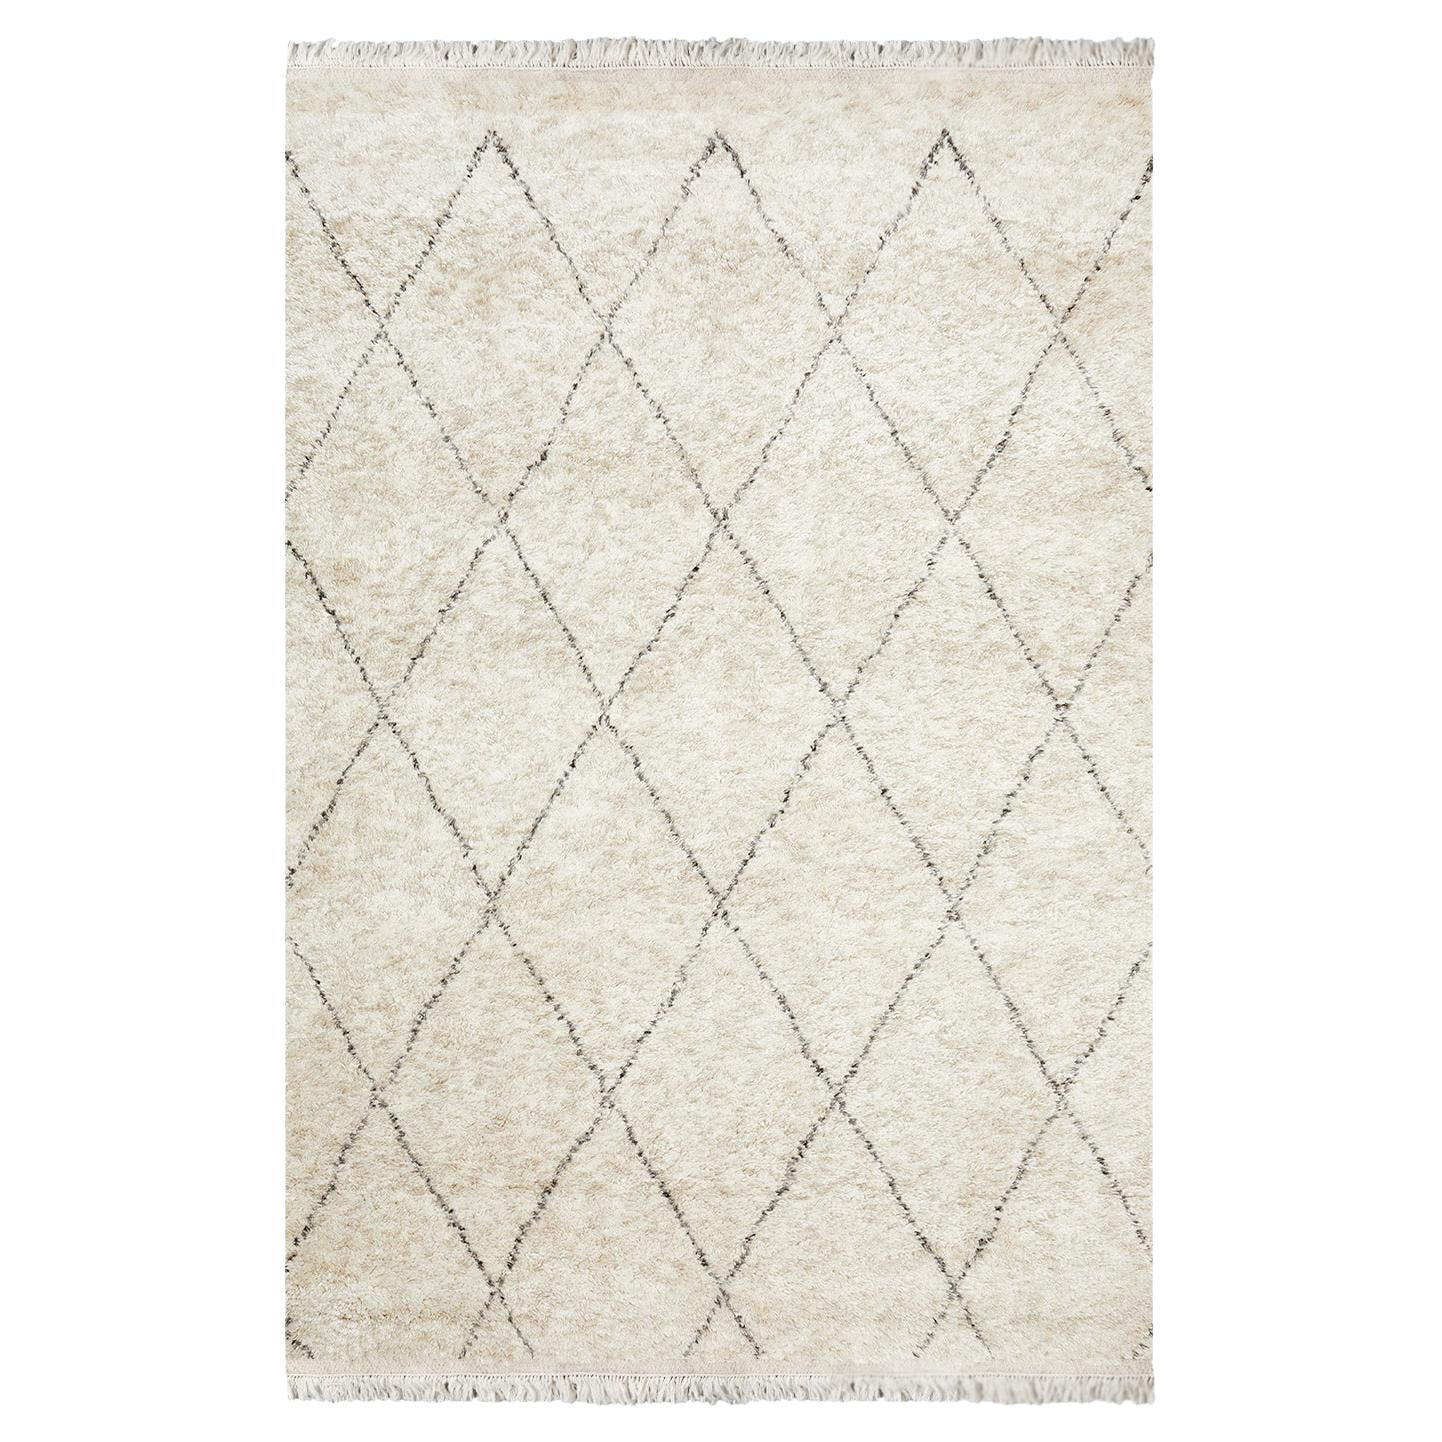 Solo Rugs Shaggy Moroccan Hand-Knotted Ivory Area Rug